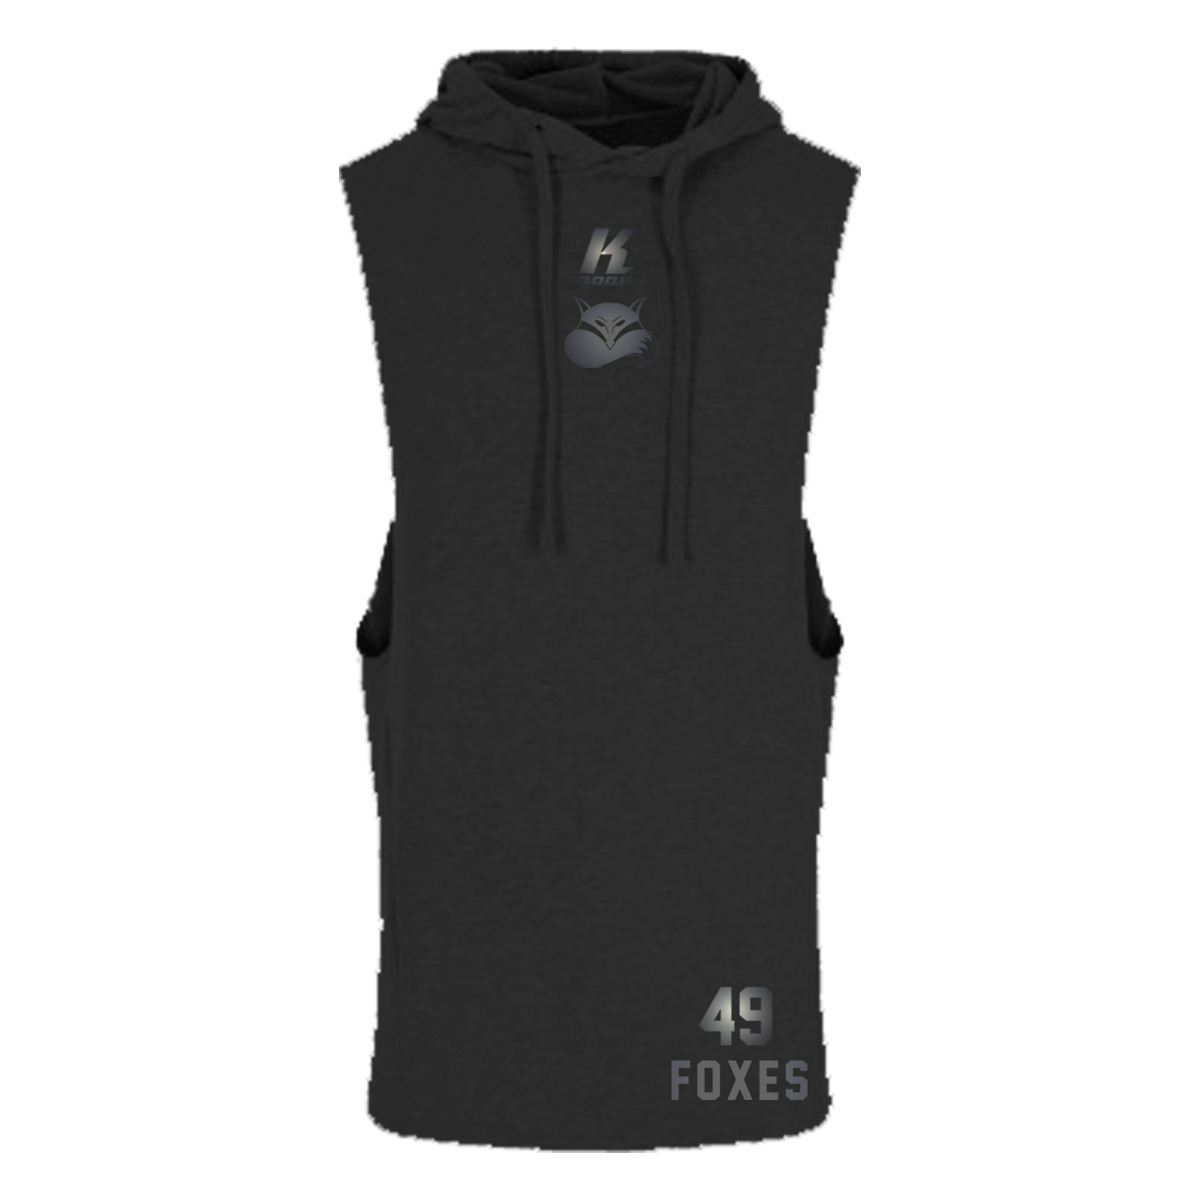 Foxes "Blackline" Sleeveless Muscle Hoodie JC053 with Playernumber or Initials